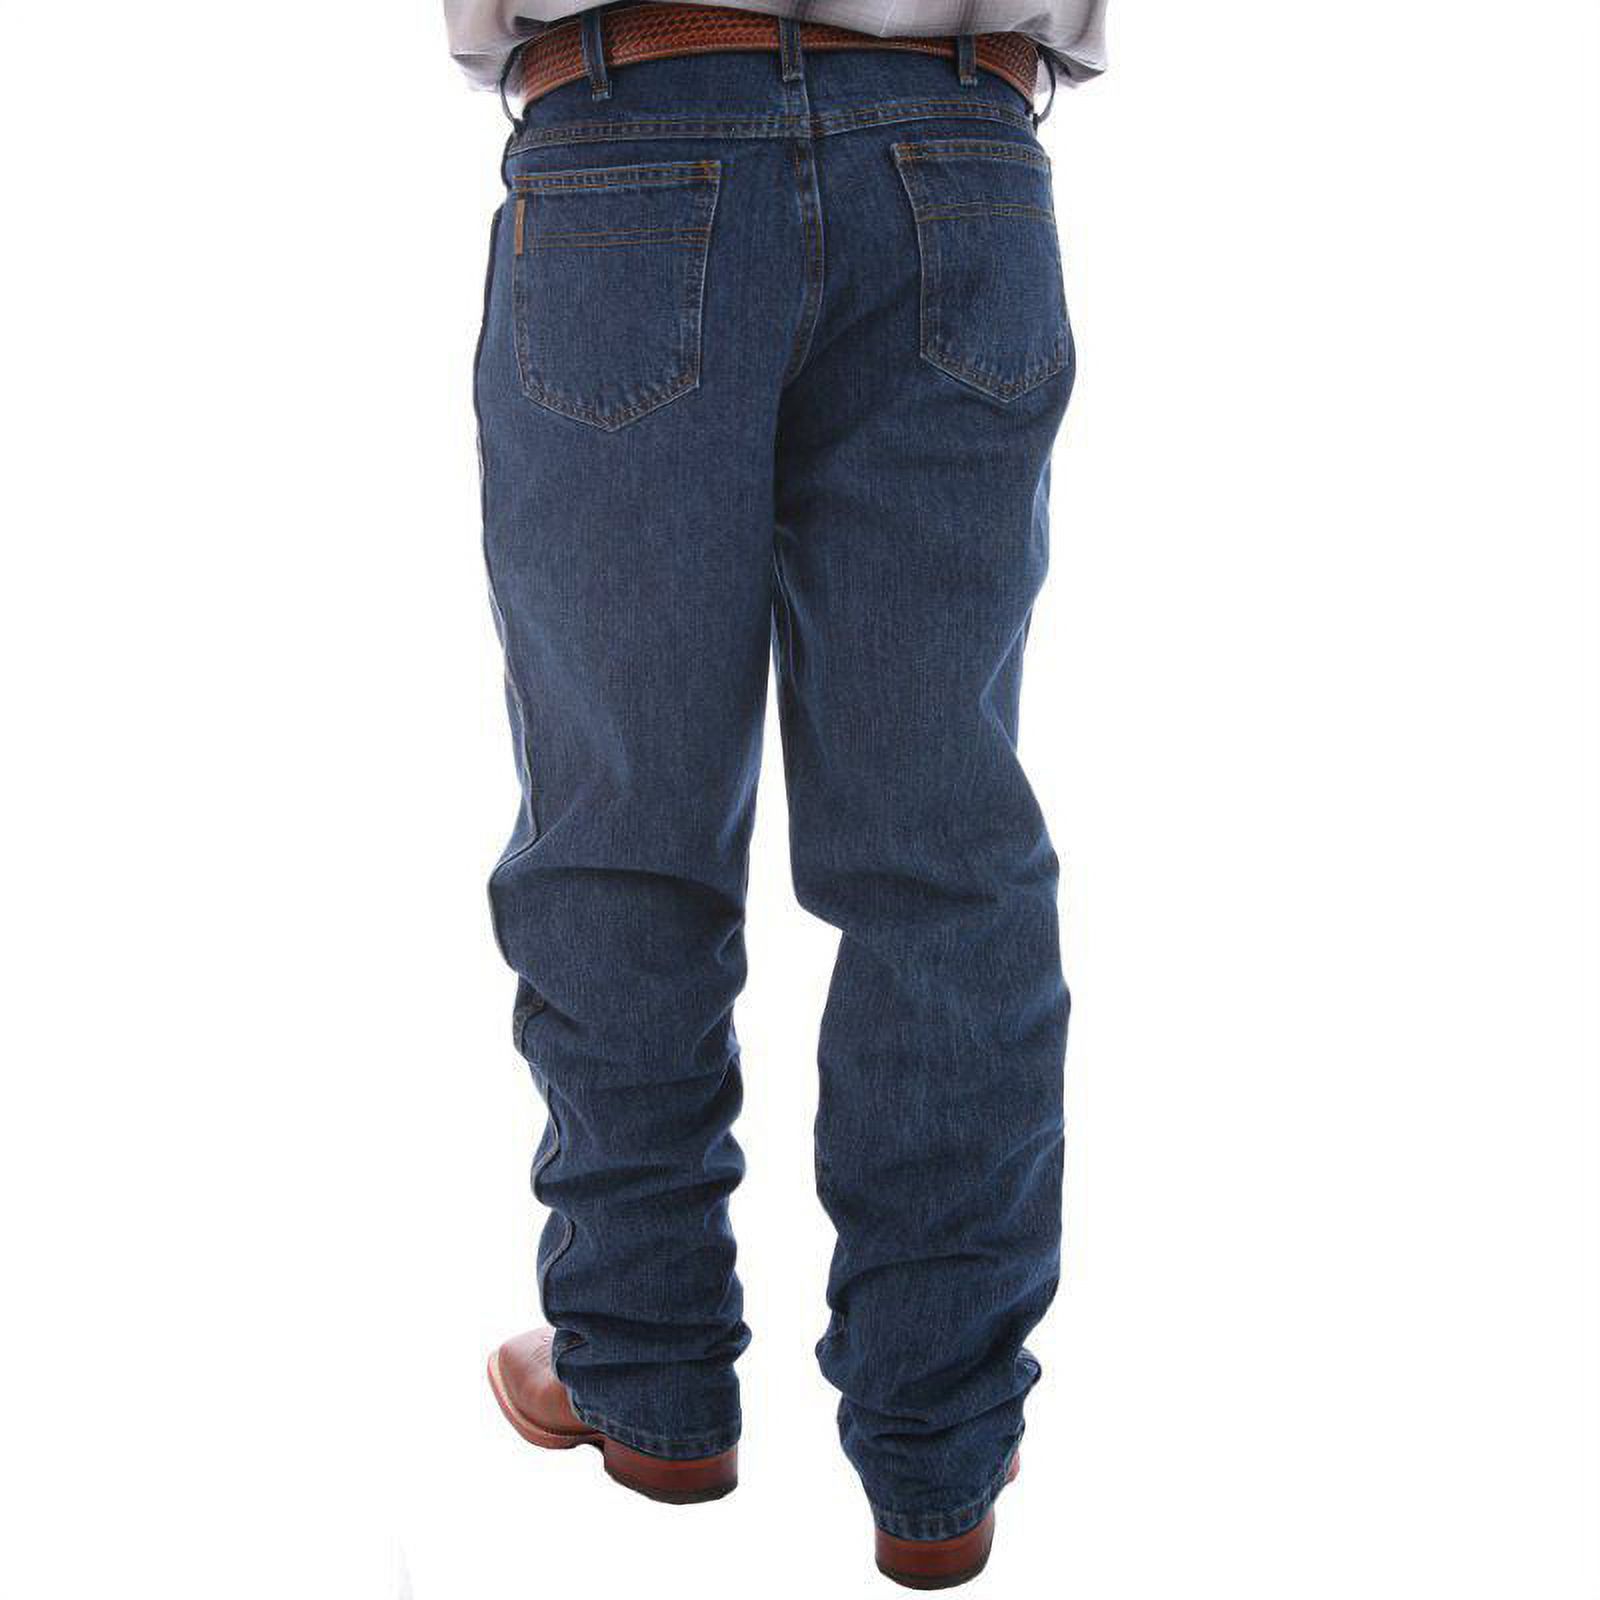 Cinch Men's Green Label Relaxed Fit Dark Stonewash Jeans Dark Stone 29W x 30L  US - image 1 of 4